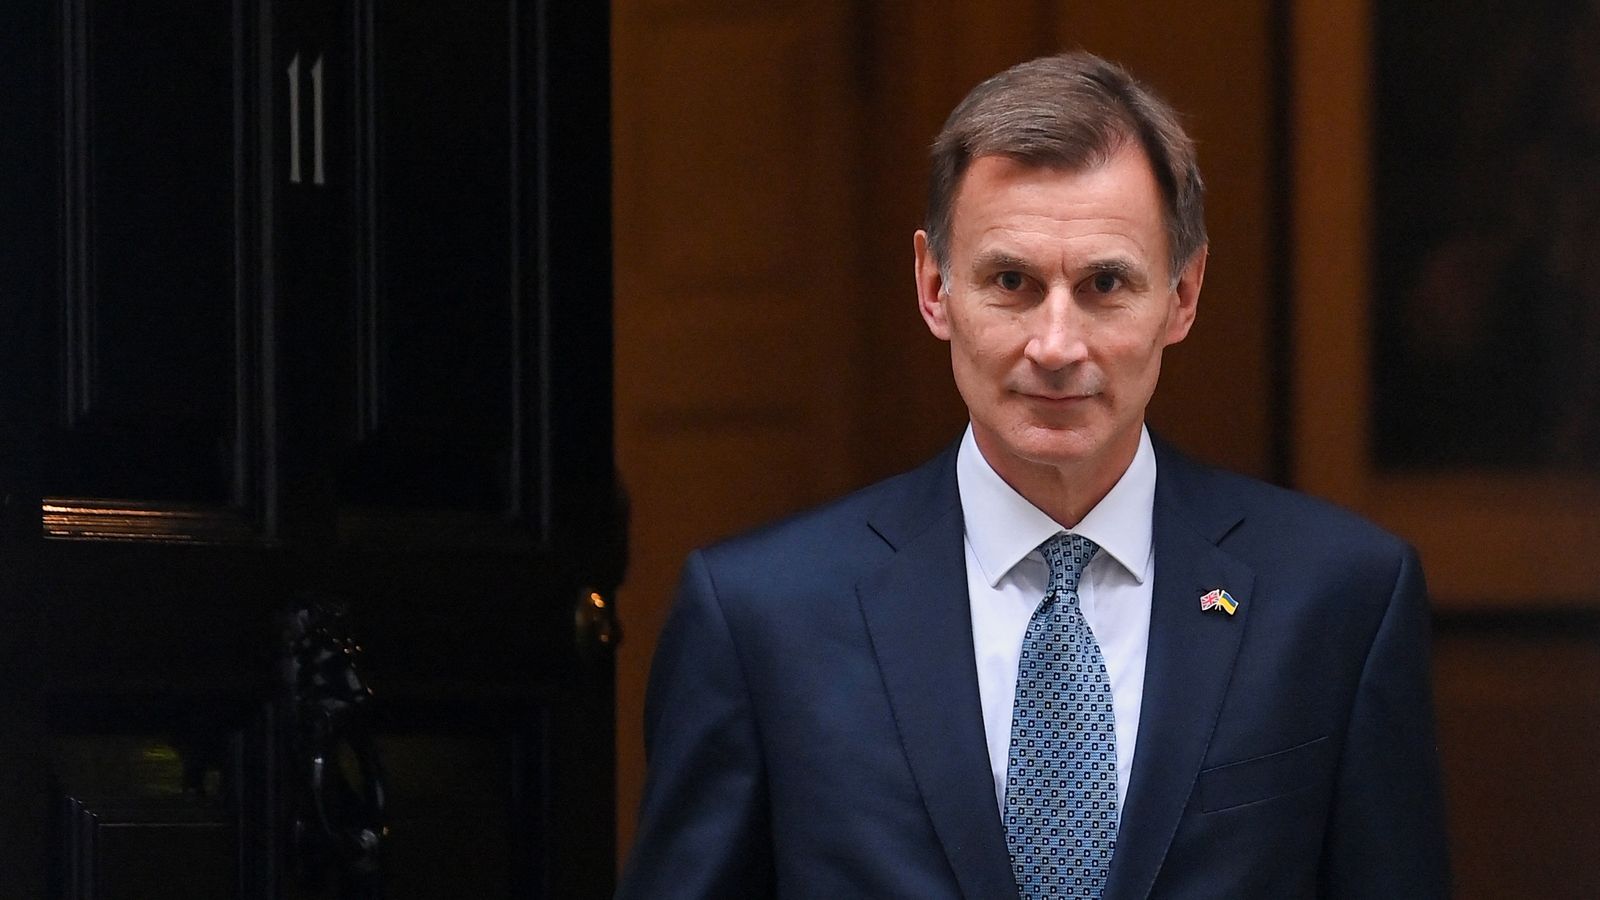 Budget will 'break down barriers' to work in bid to fill vacancy void, Chancellor Jeremy Hunt tells Sky News